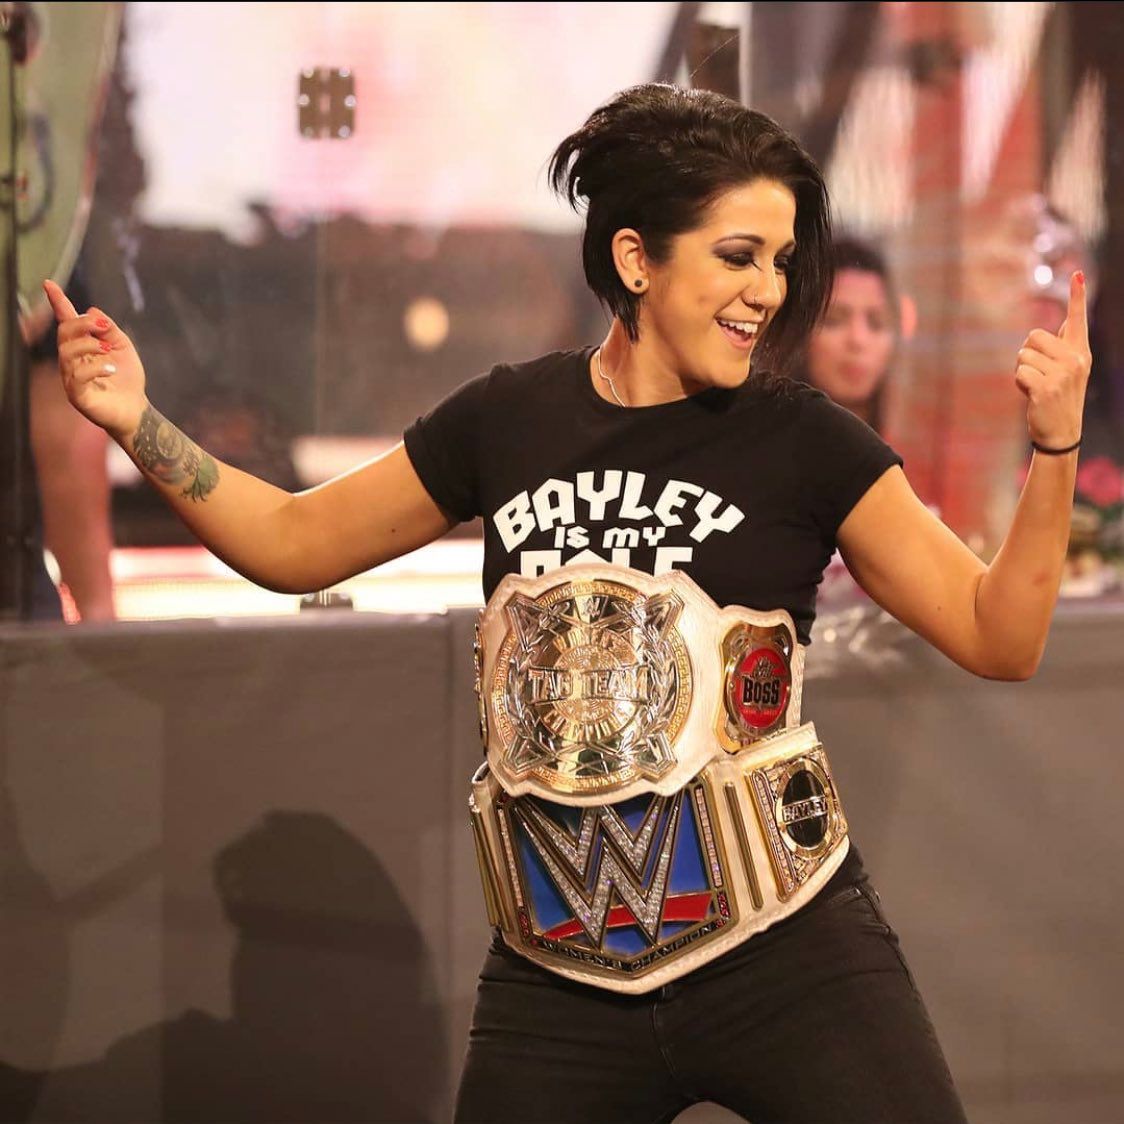 Bayley has won multiple titles in WWE